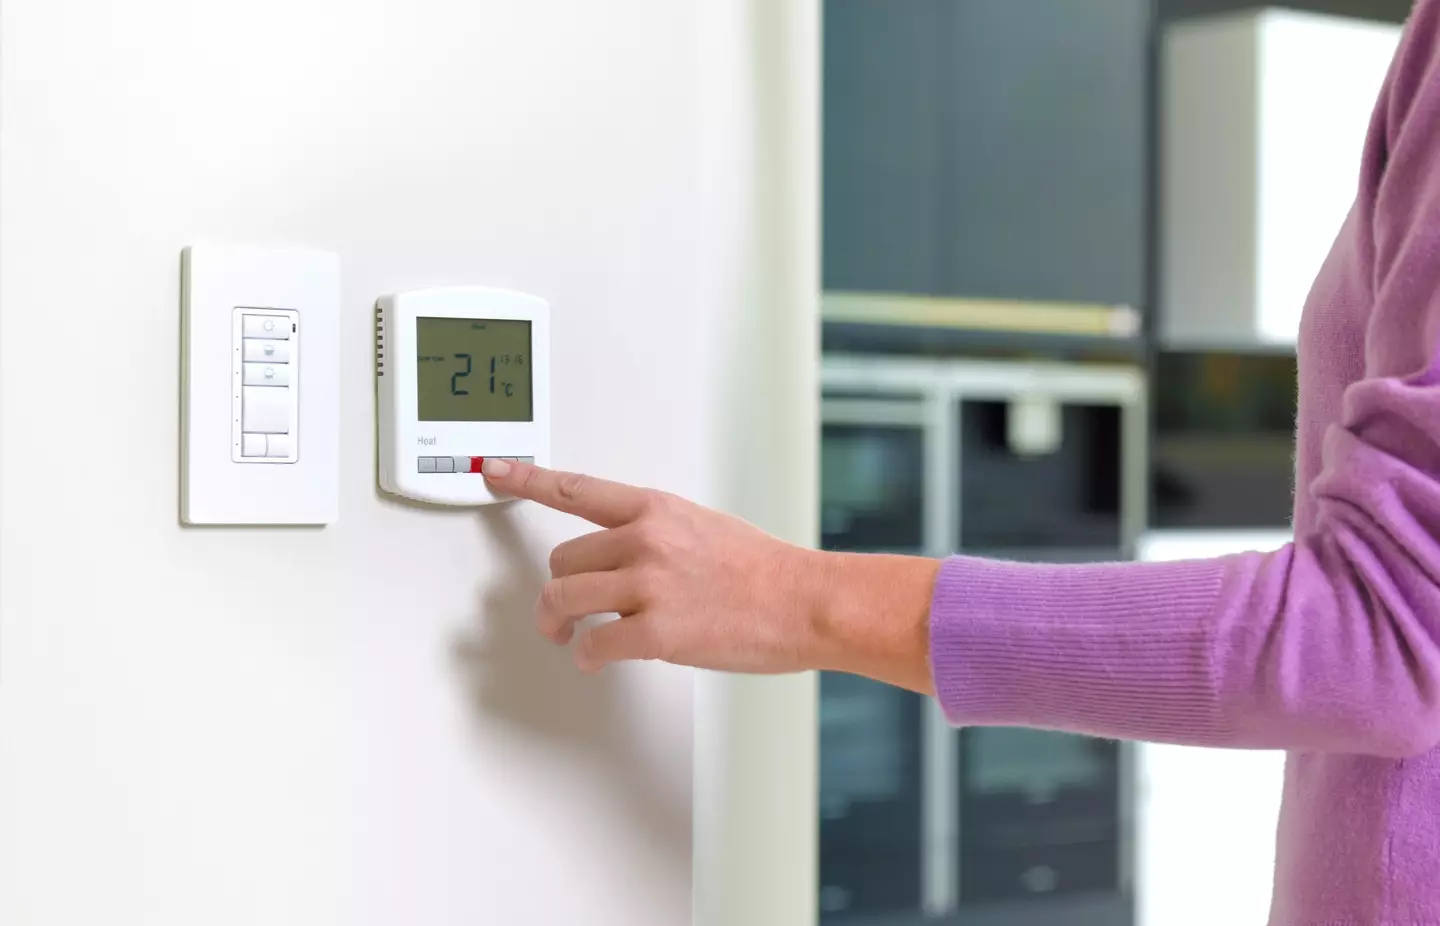 Turning the thermostat off will secure you a better sleep and save you cash.